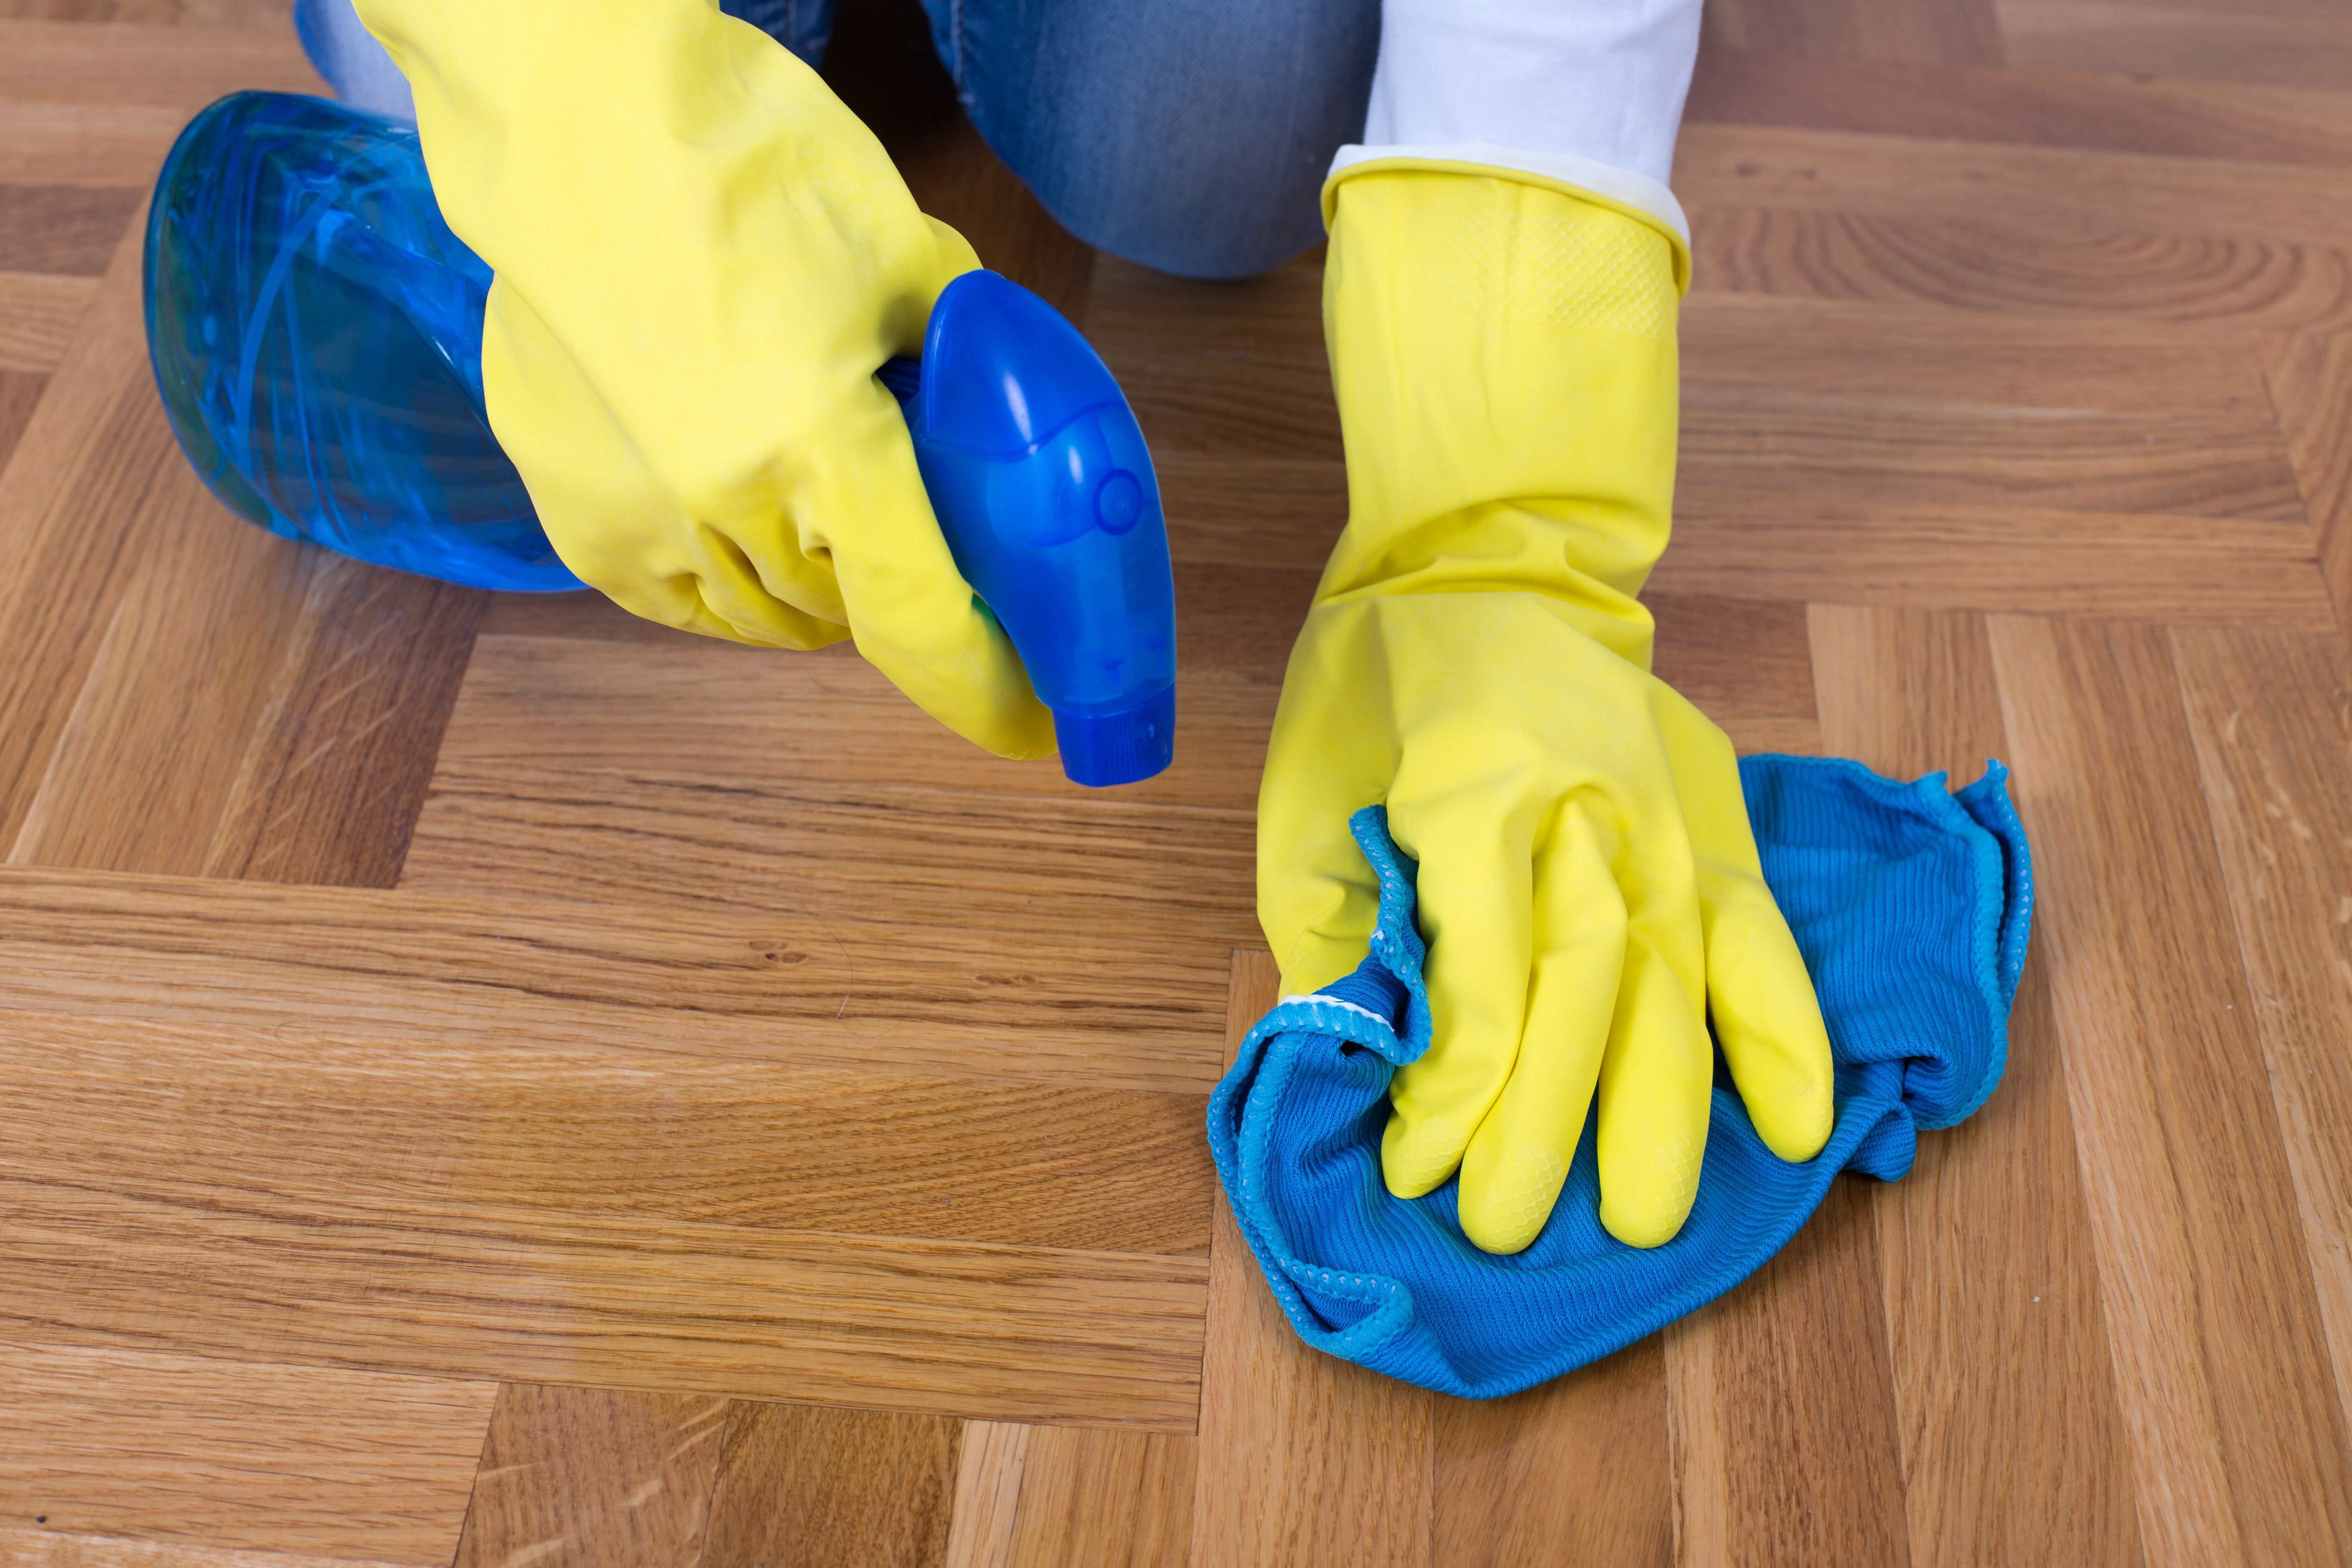 How to remove stains from a wooden floor